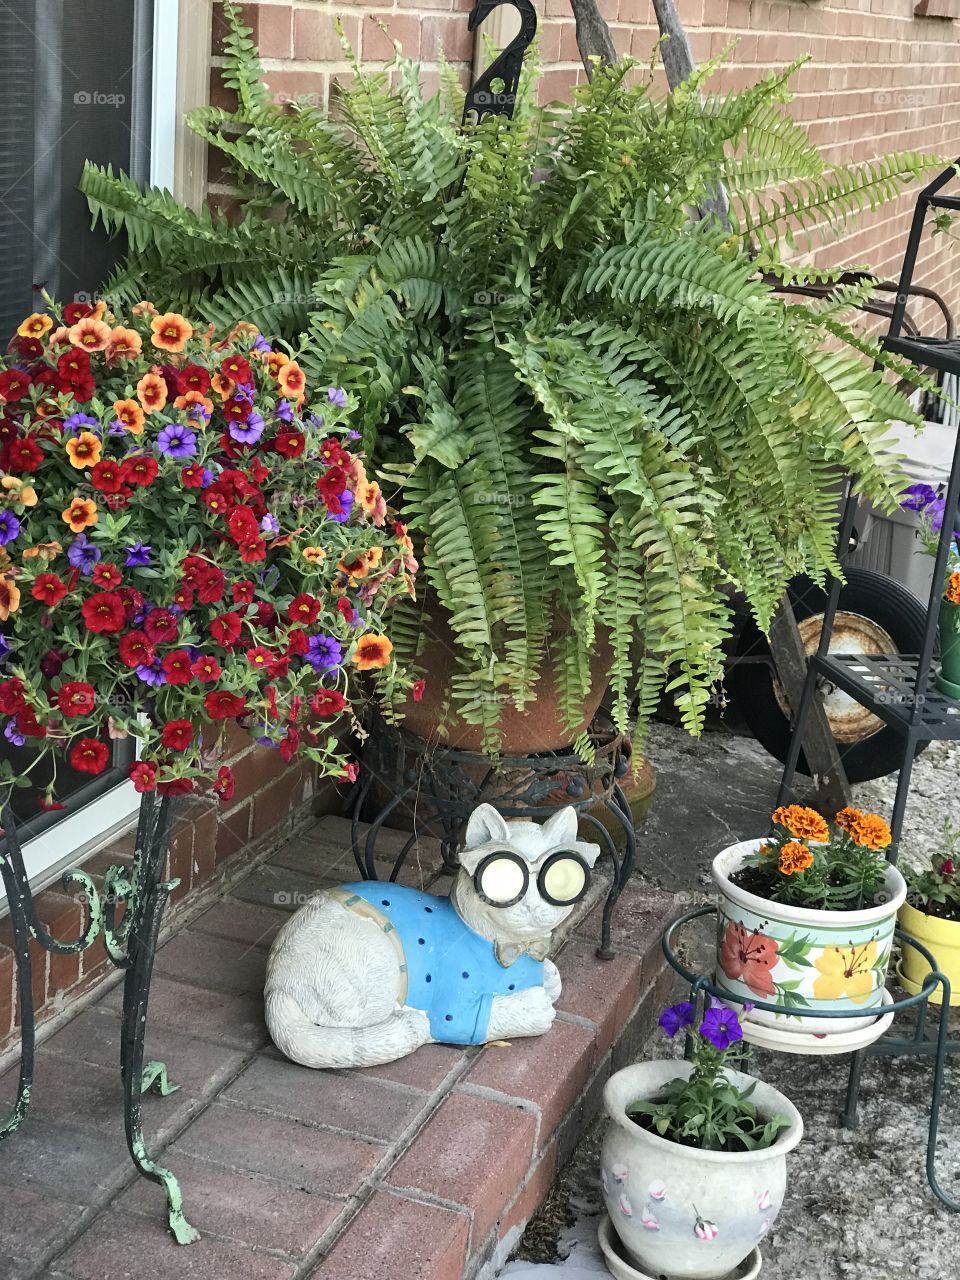 Colorful potted plants on the patio with ceramic cat.